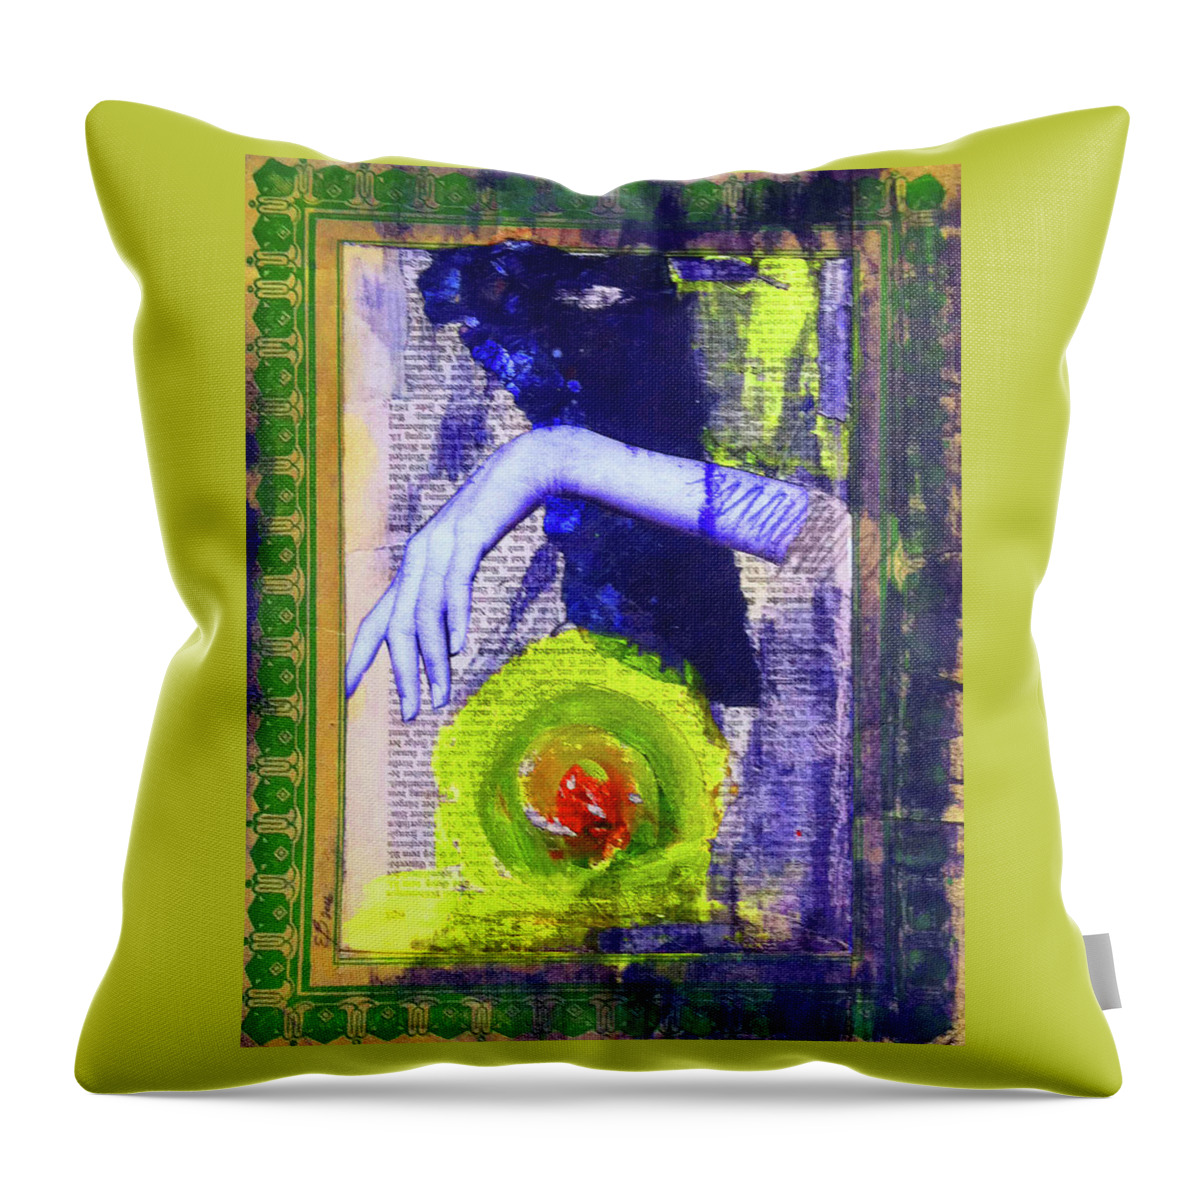 Dada Throw Pillow featuring the mixed media Dissicated Hope by Elizabeth Bogard